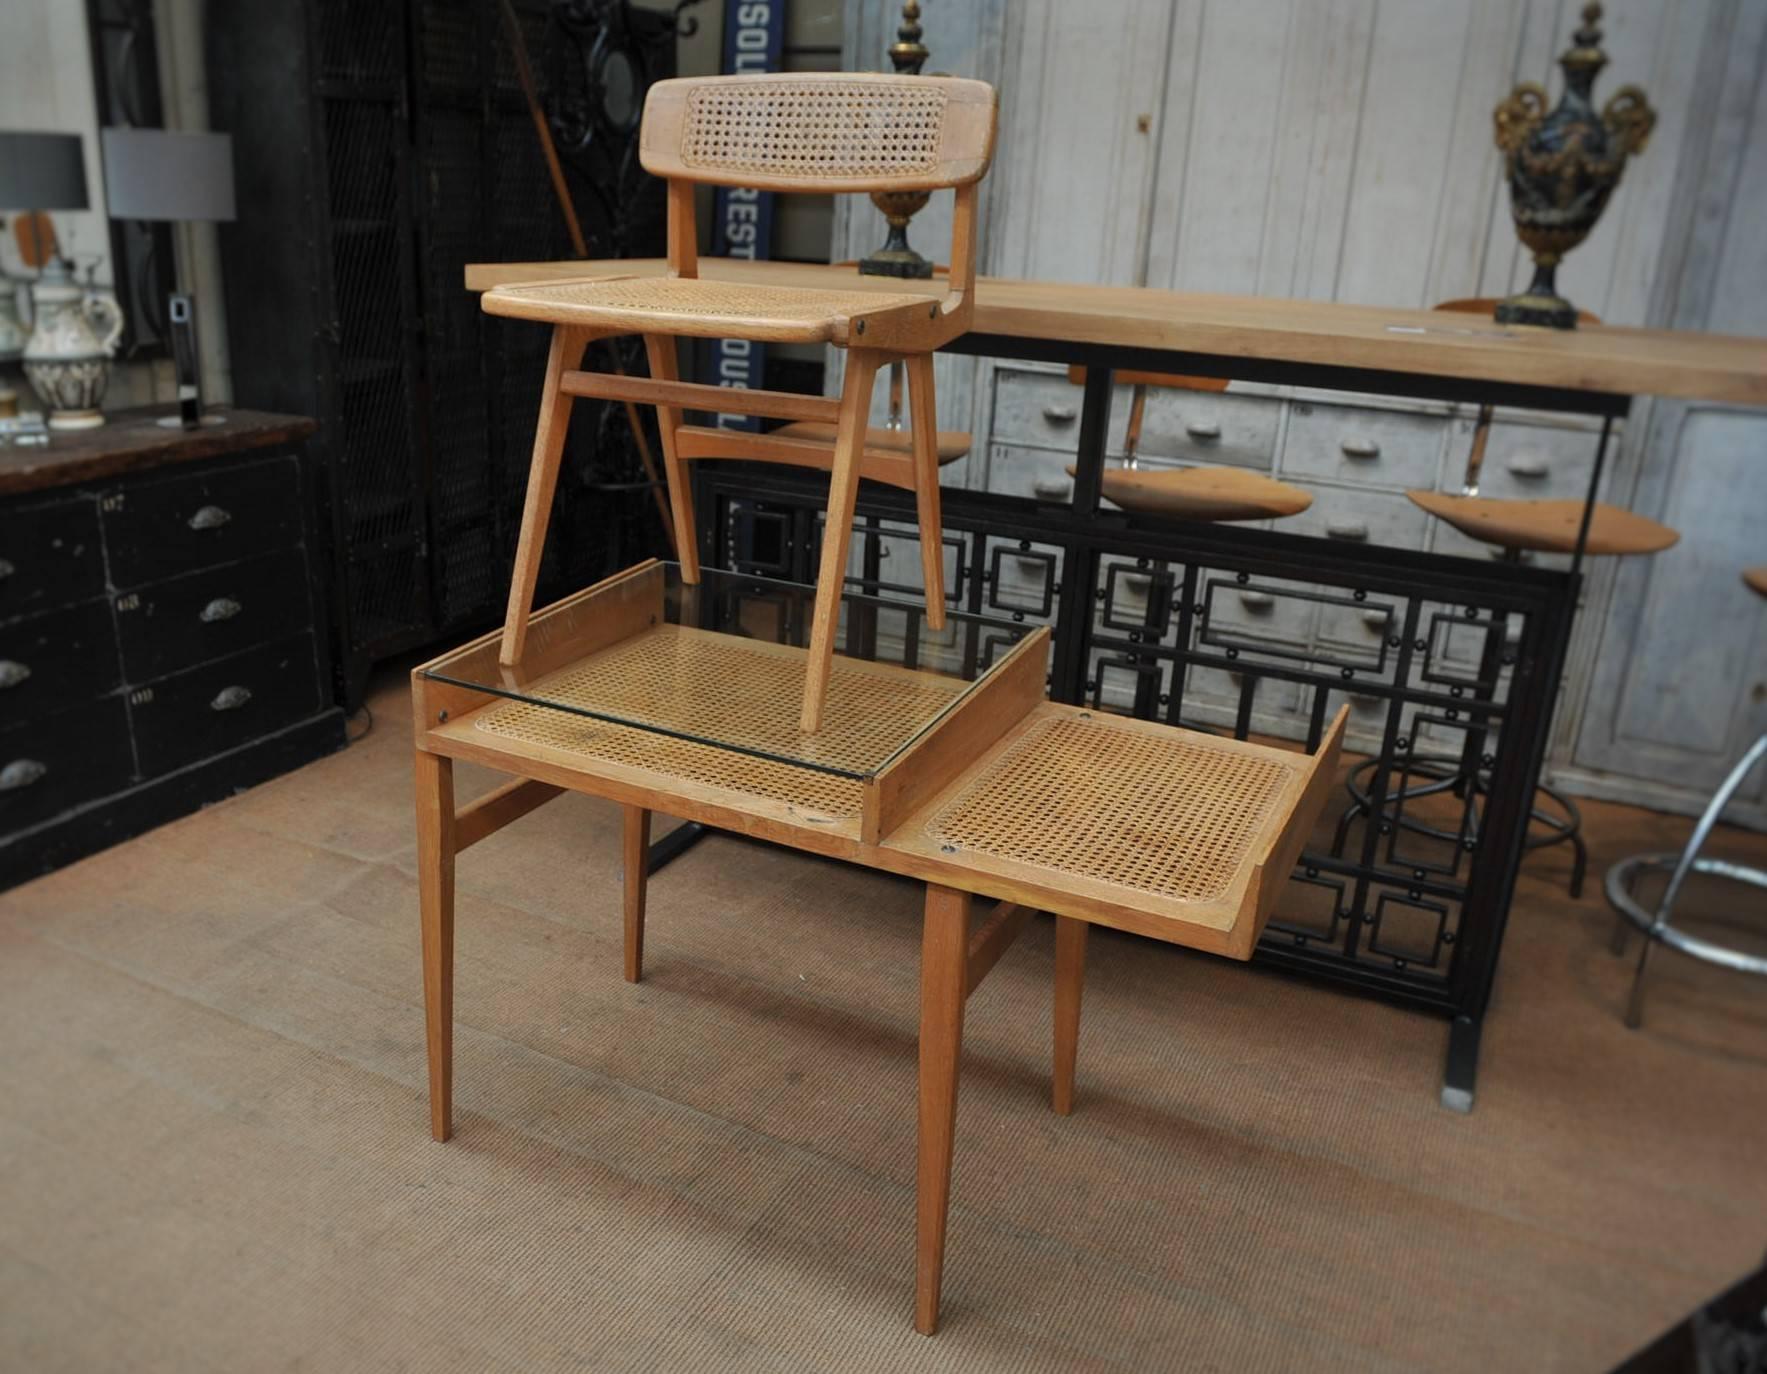 Rare French oak and caned top and removable original security glass desk with it's chair caned back and seat by Roger Landault, circa 1950.
Very stable and excellent condition.
 Measures: Chair: 45 x 45 x H 70 cm. Height seat 46 cm.
